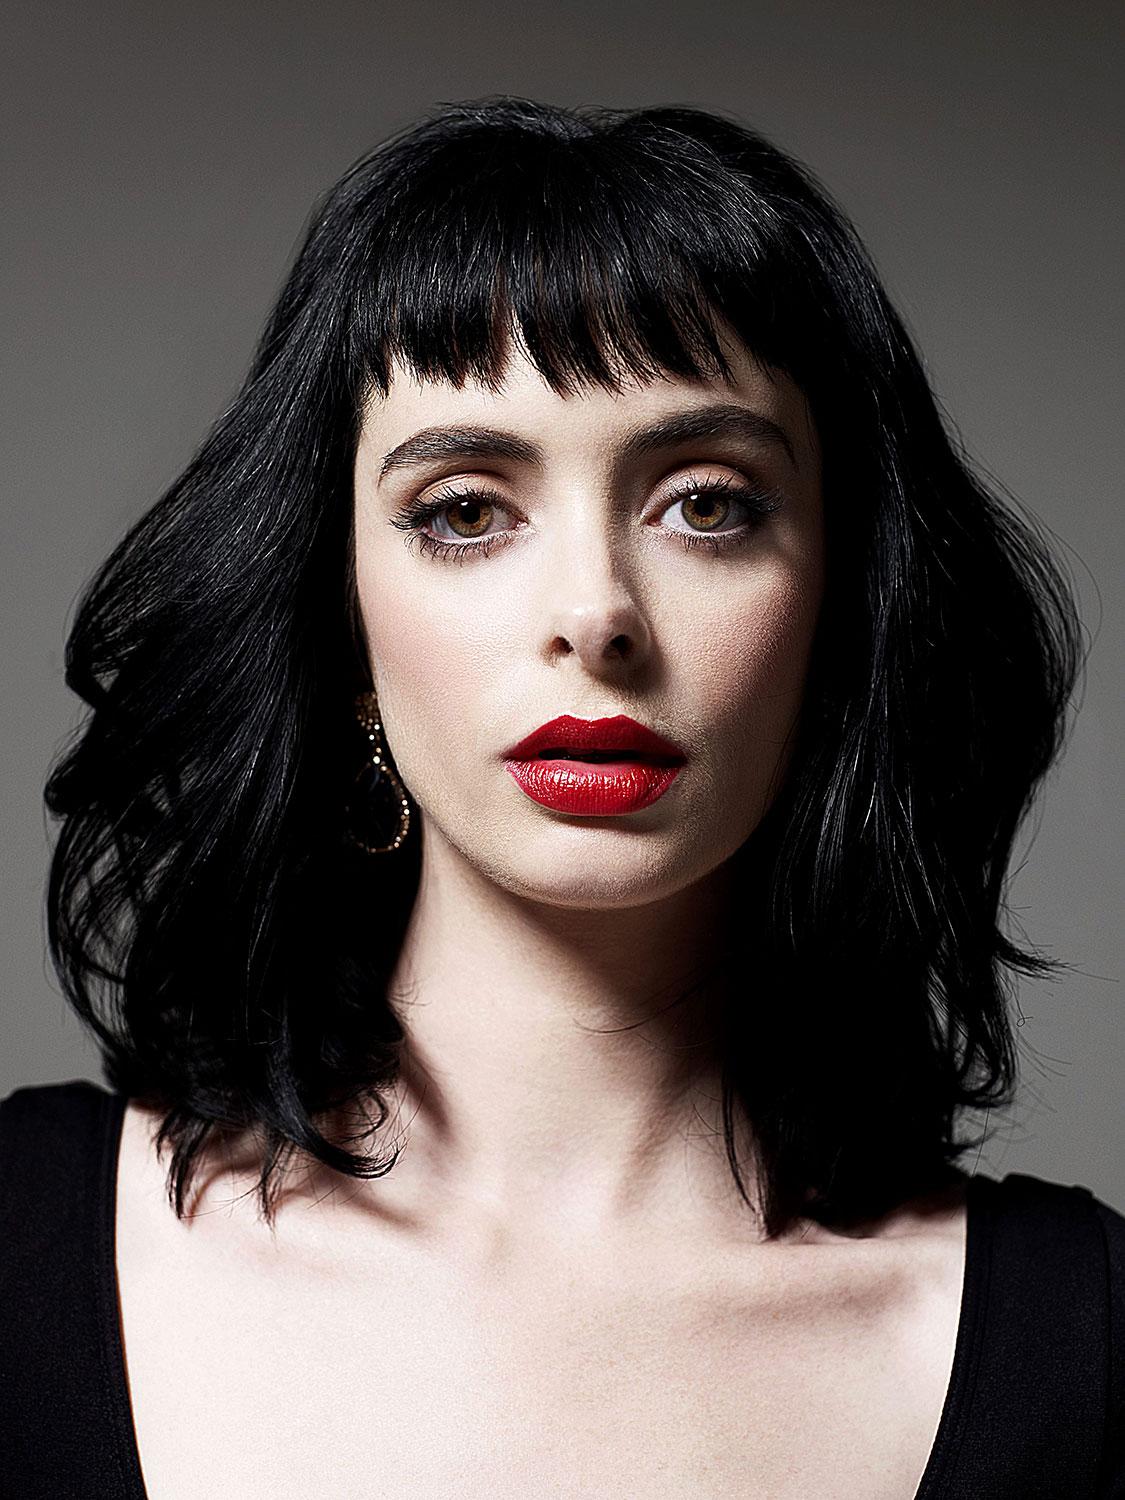 Your heart is all I own [mariage Isabel] Krysten-ritter